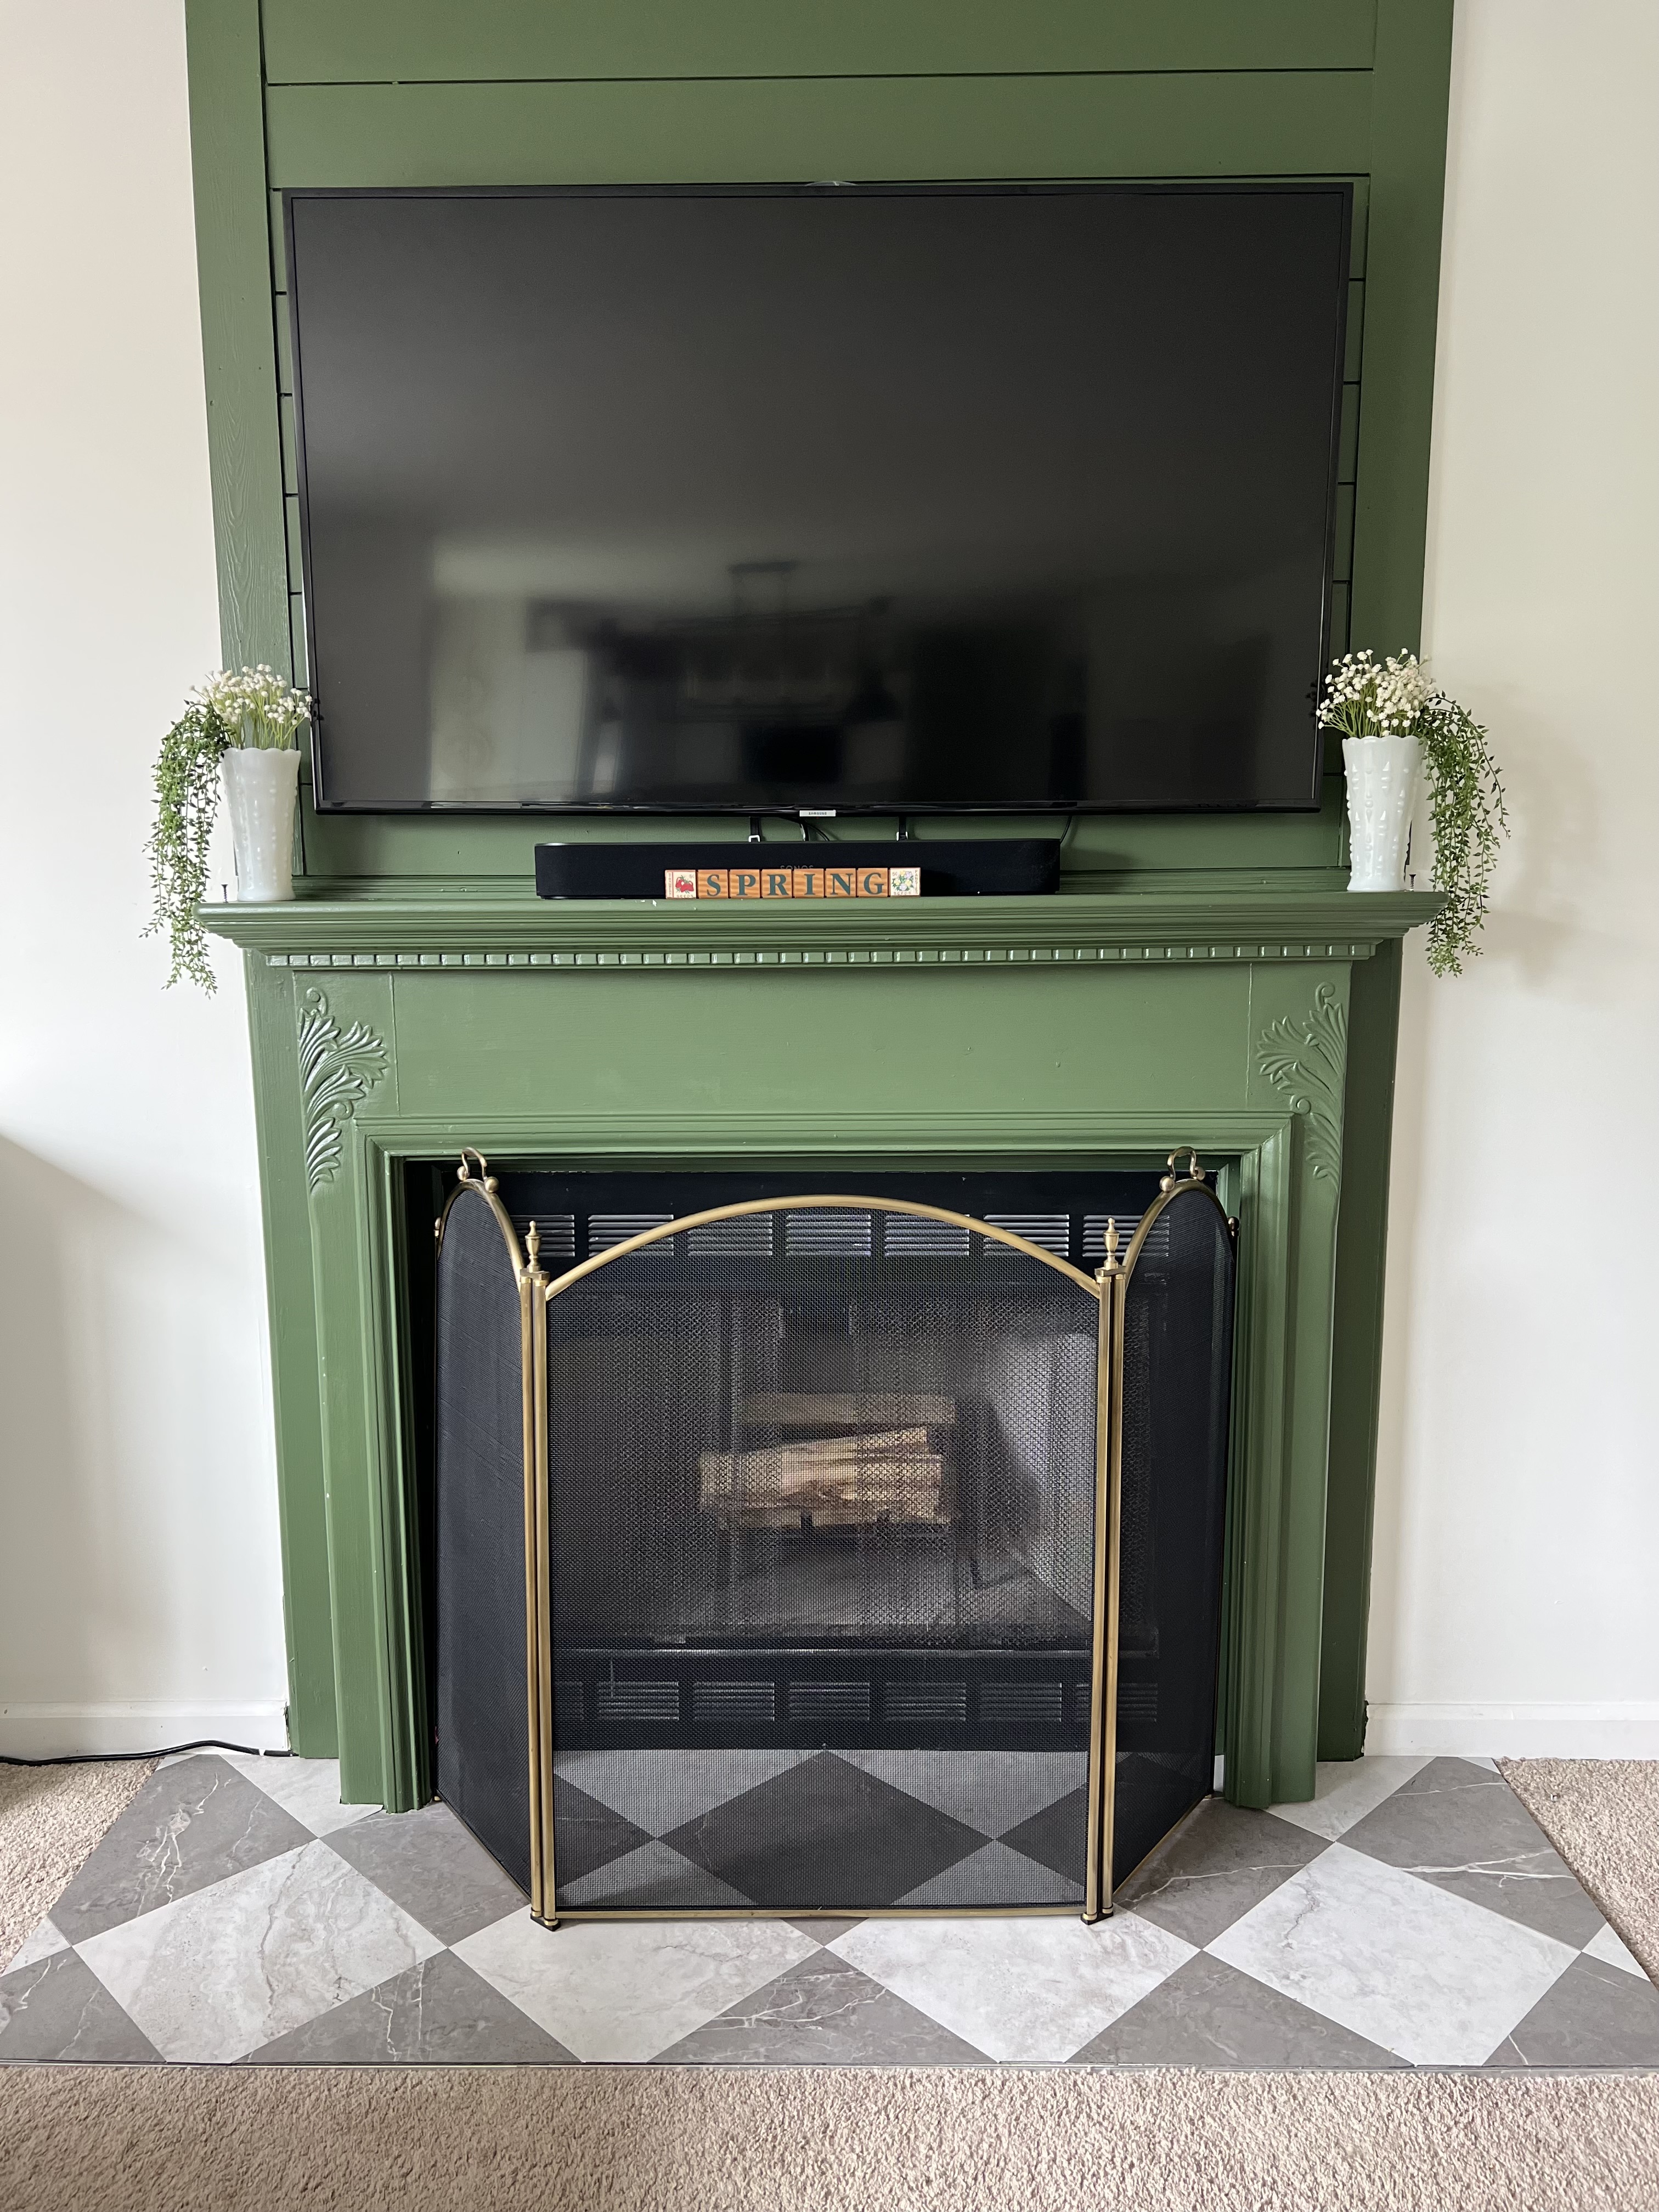 After Fireplace Tile
